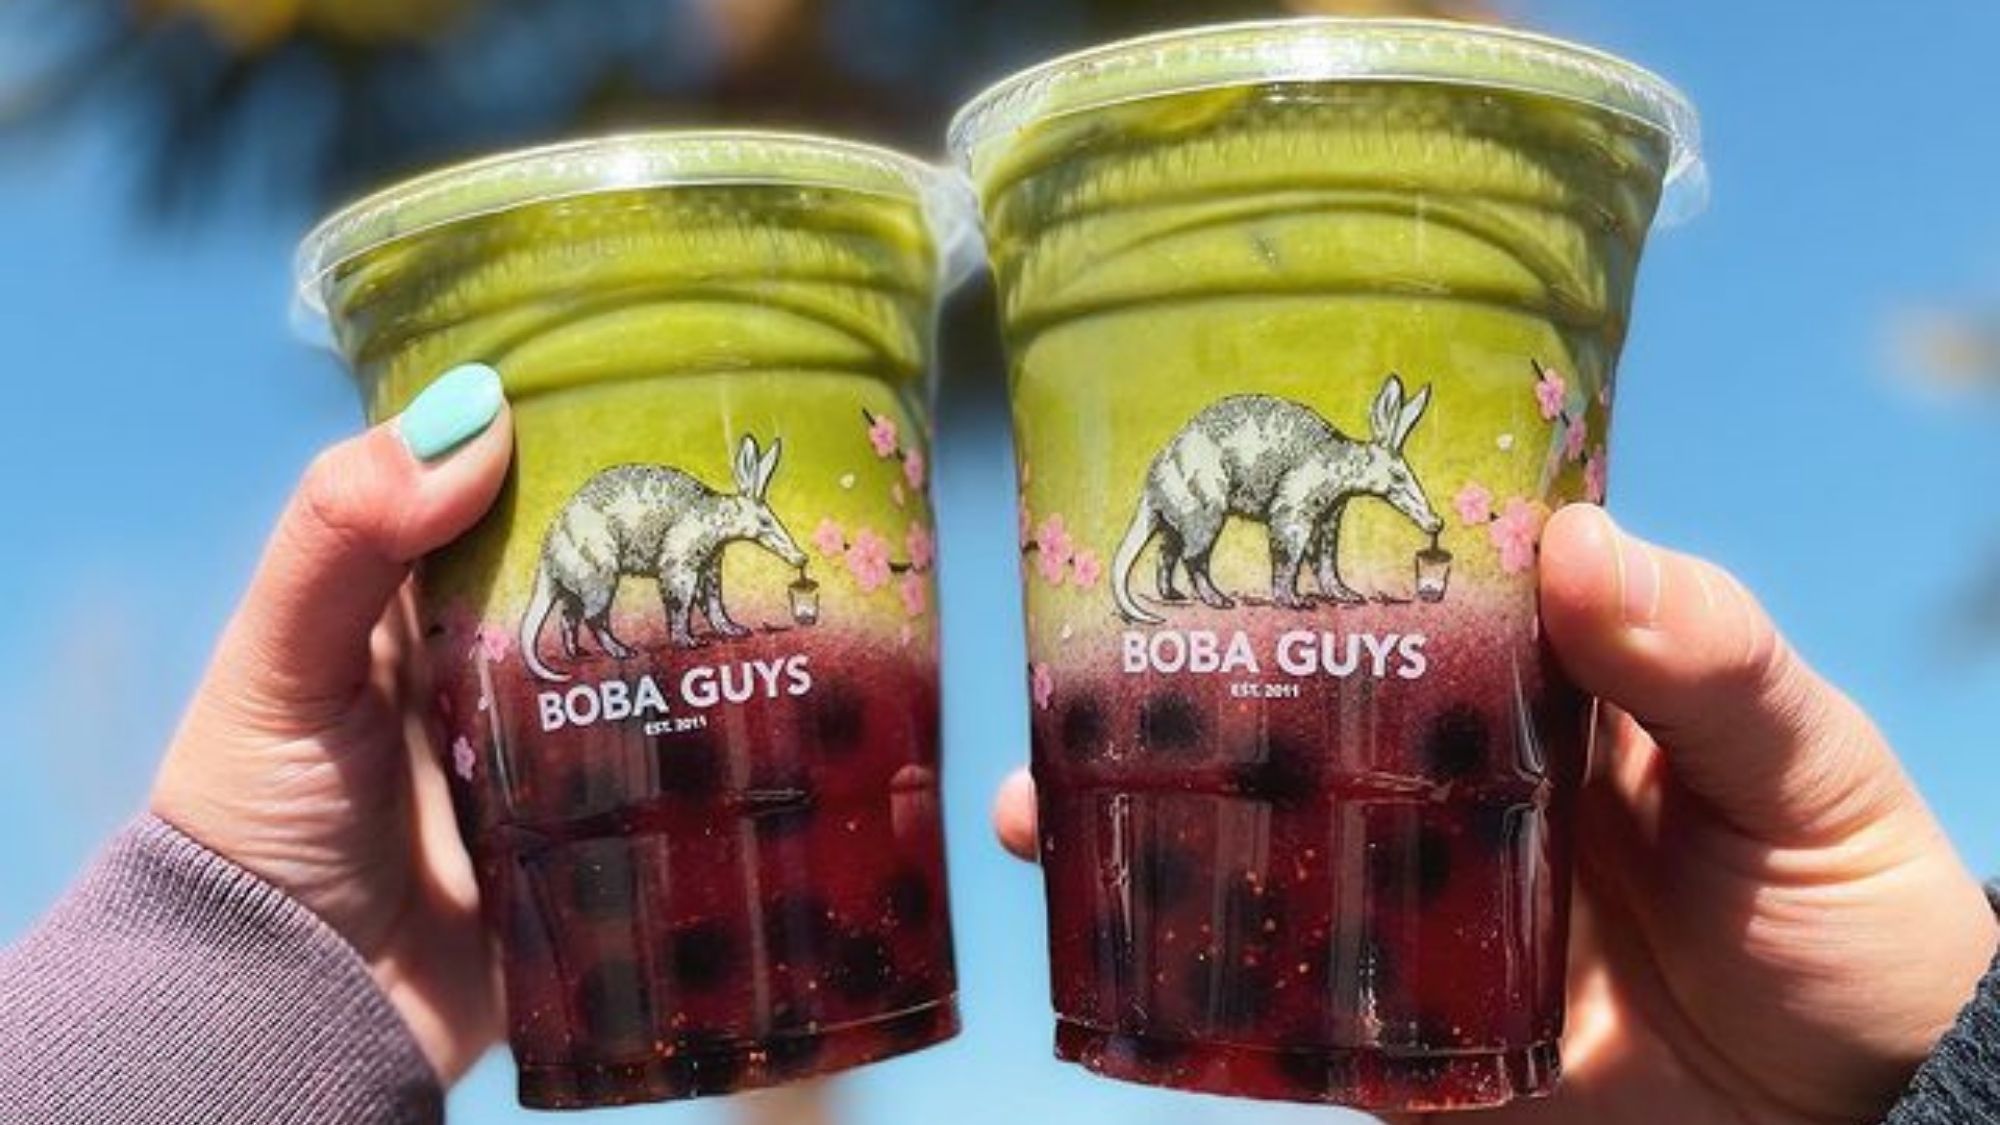 #FirstWorldProblems: Bubble tea runs out in the US